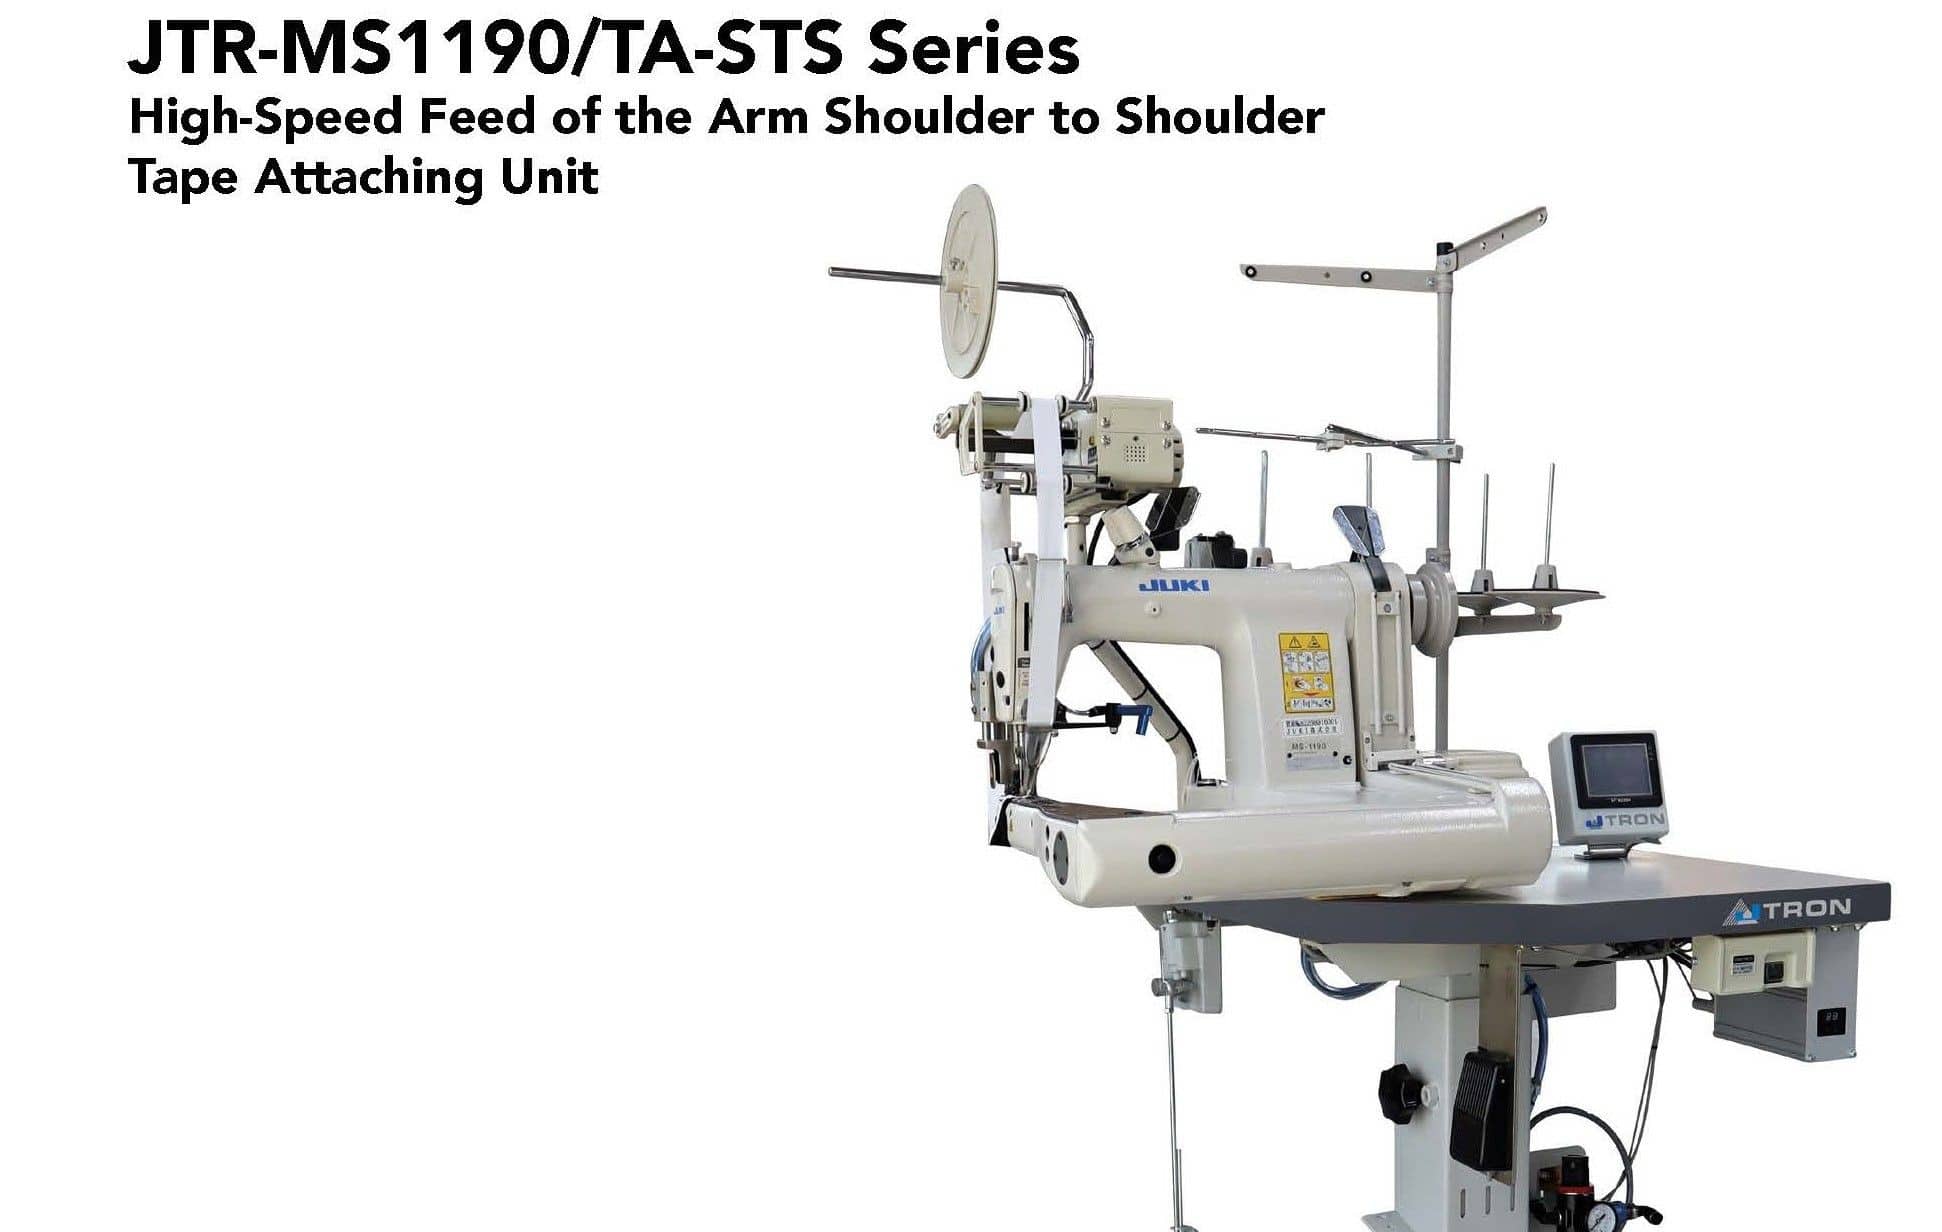 JTRON JTR-MS1190/TA-STS Series
High-Speed Feed of the Arm Shoulder to Shoulder 
Tape Attaching Unit